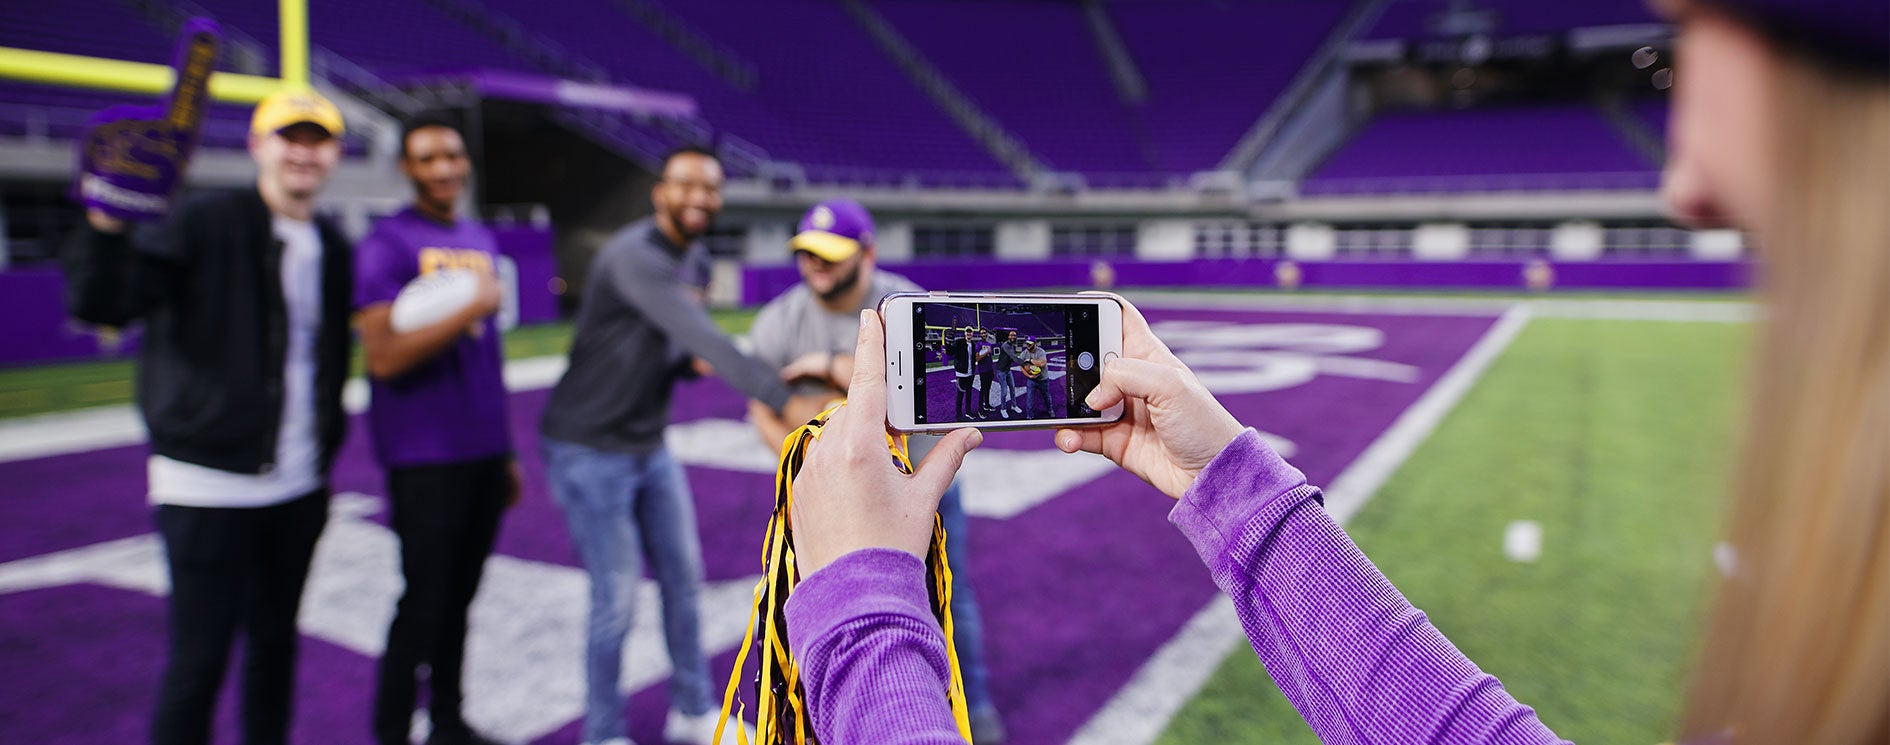 Why You Should Take the US Bank Stadium Tour